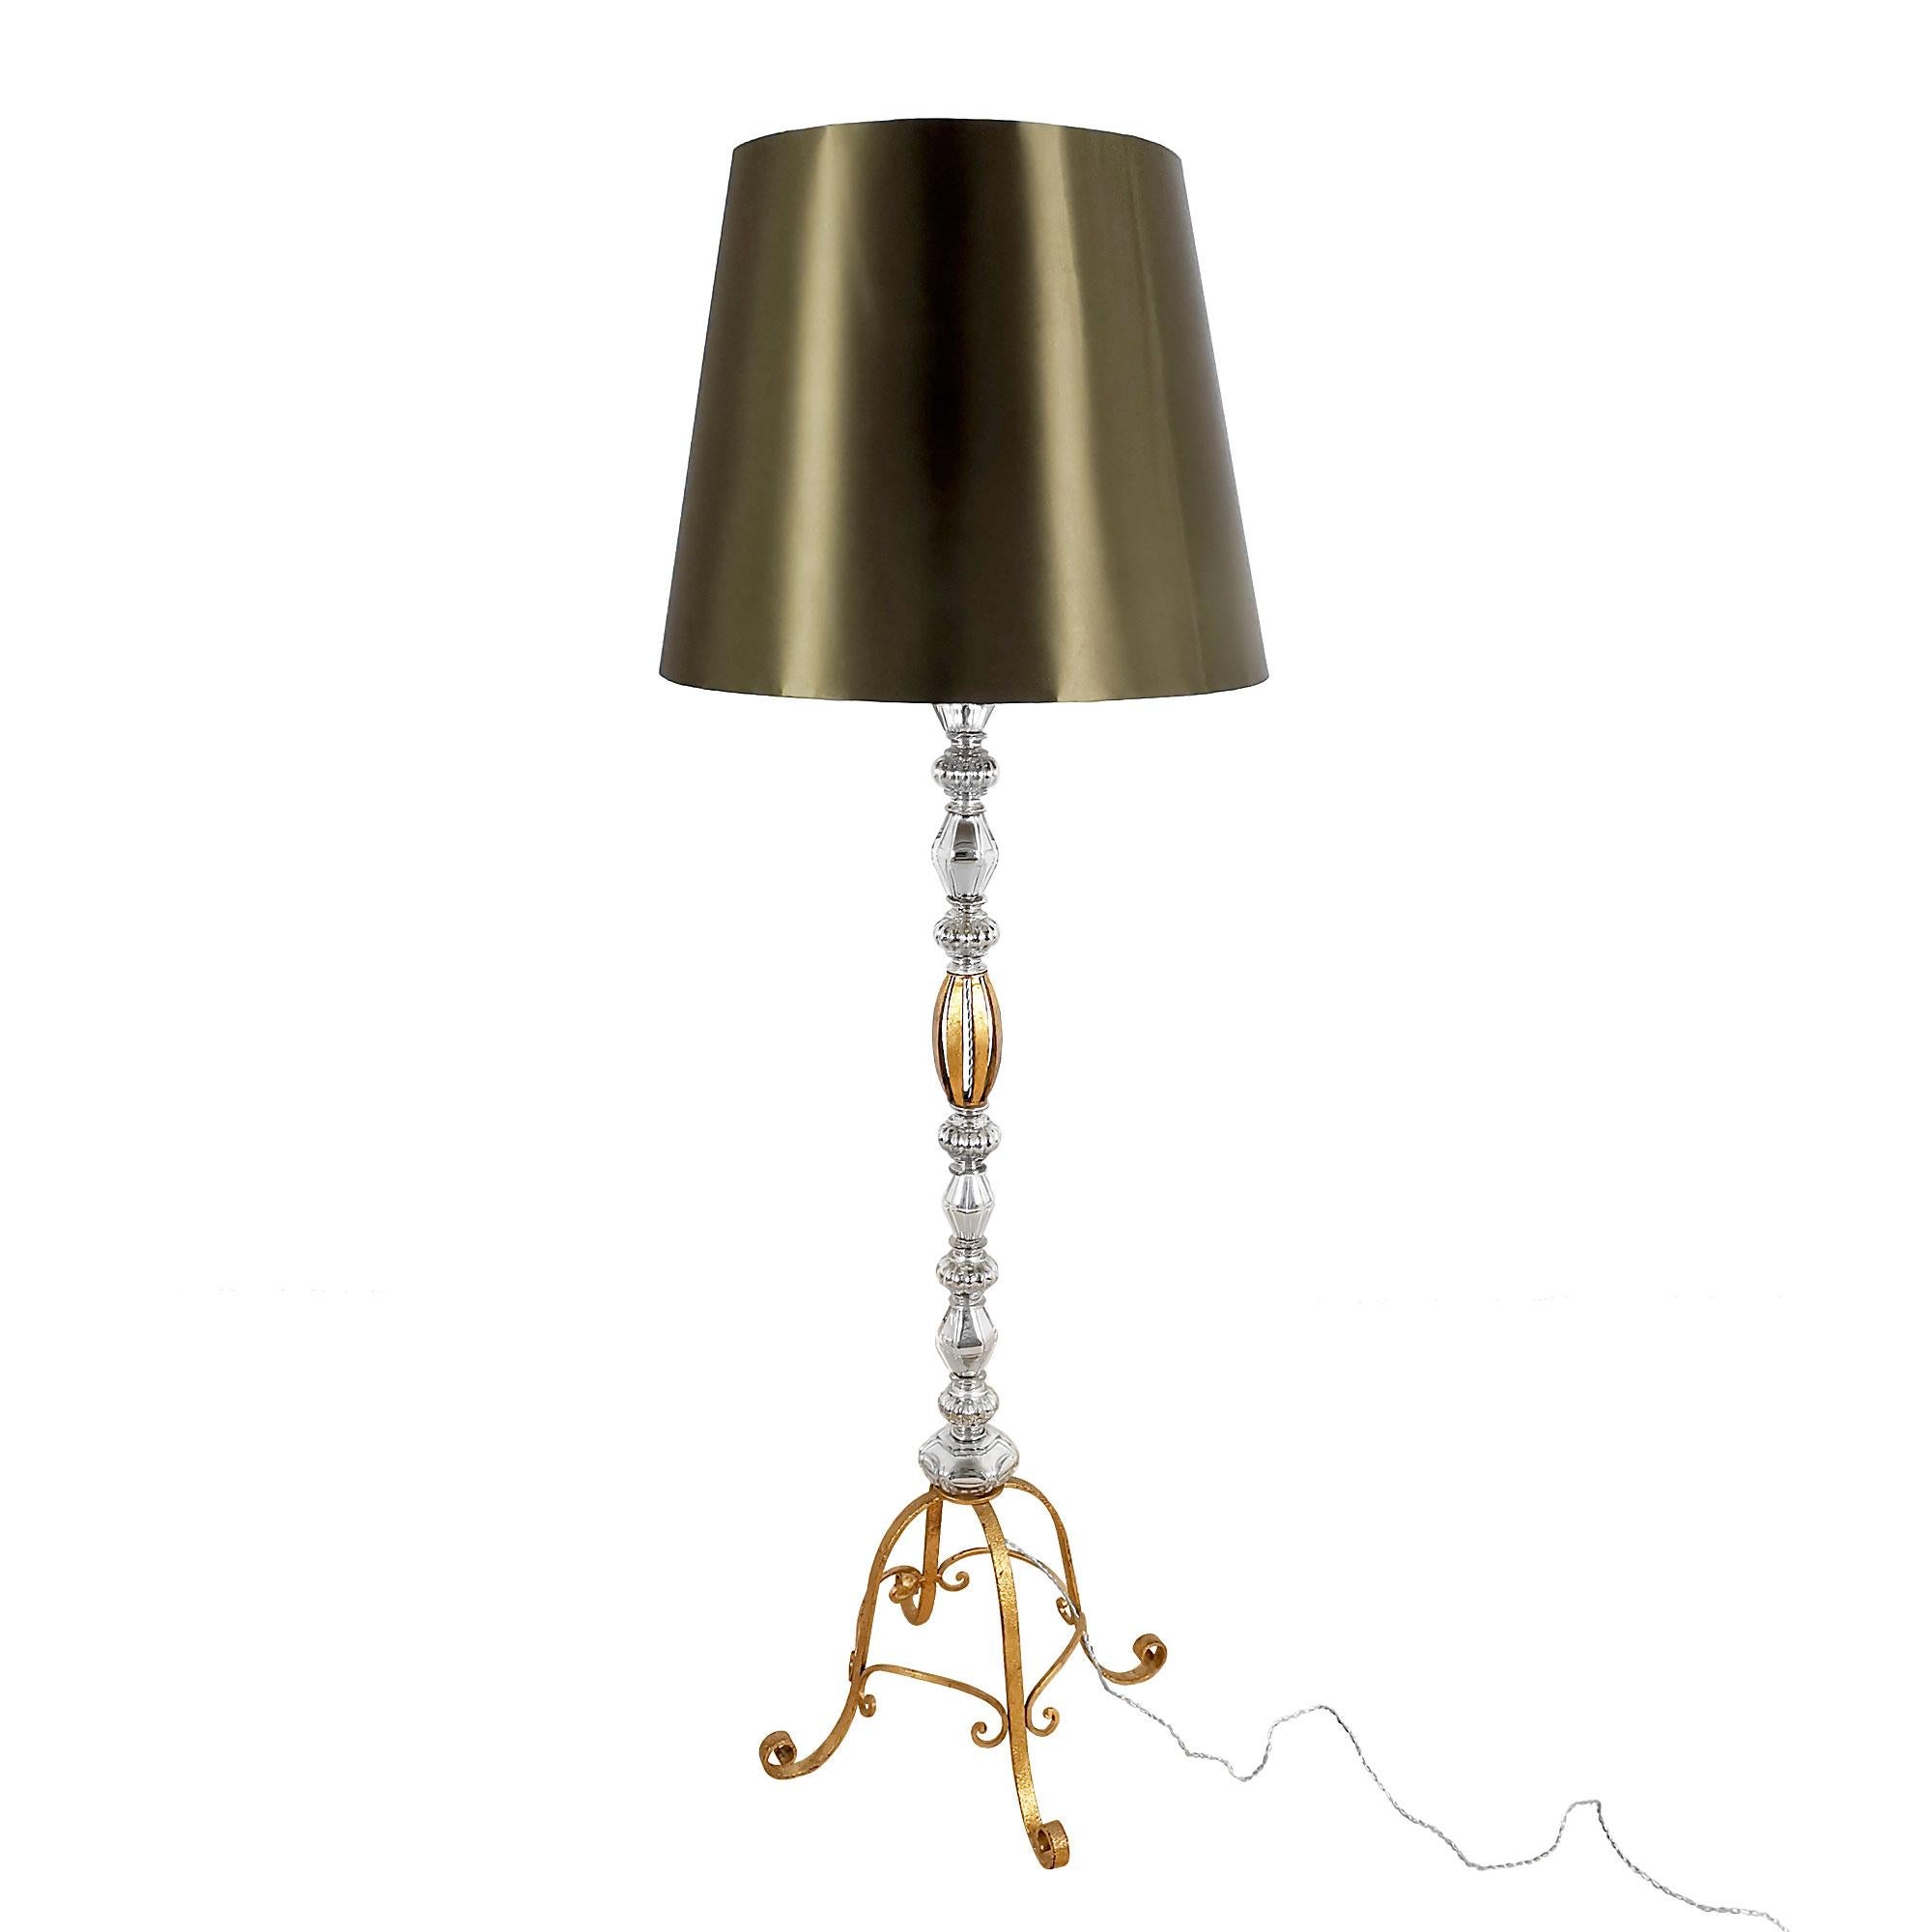 High quality standing lamp with a golden wrought iron structure and eleven pieces of silvered blown glass. Brass double lightning system and diffuser for the lampshade, three bayonet bulbs.
France c. 1940

Measurements:
Base: 39 x 39 cm.